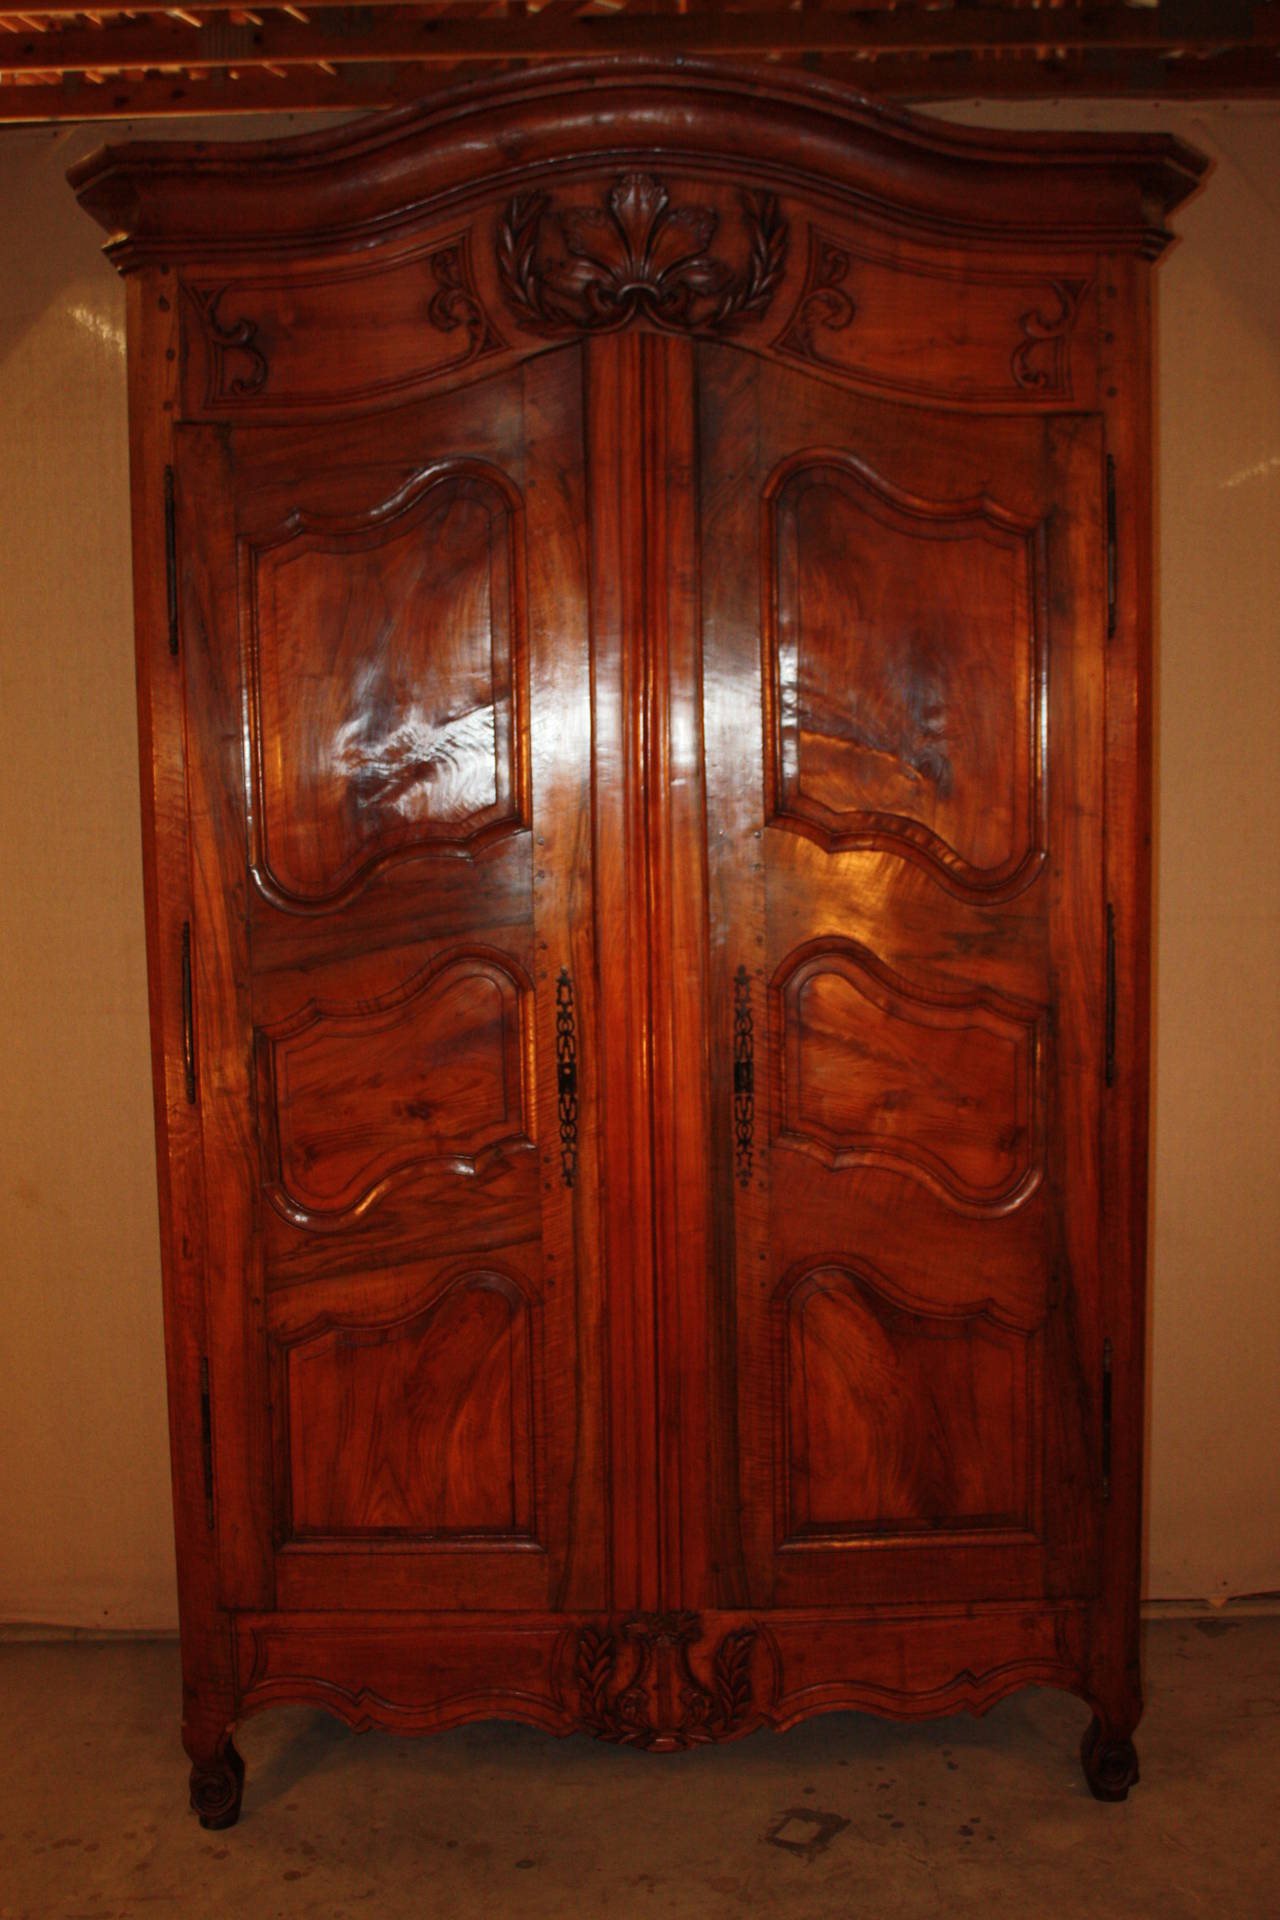 This is a beautiful French walnut armoire.  It has two shelves.  The patina of the walnut is excellent.  The carvings are very nice.